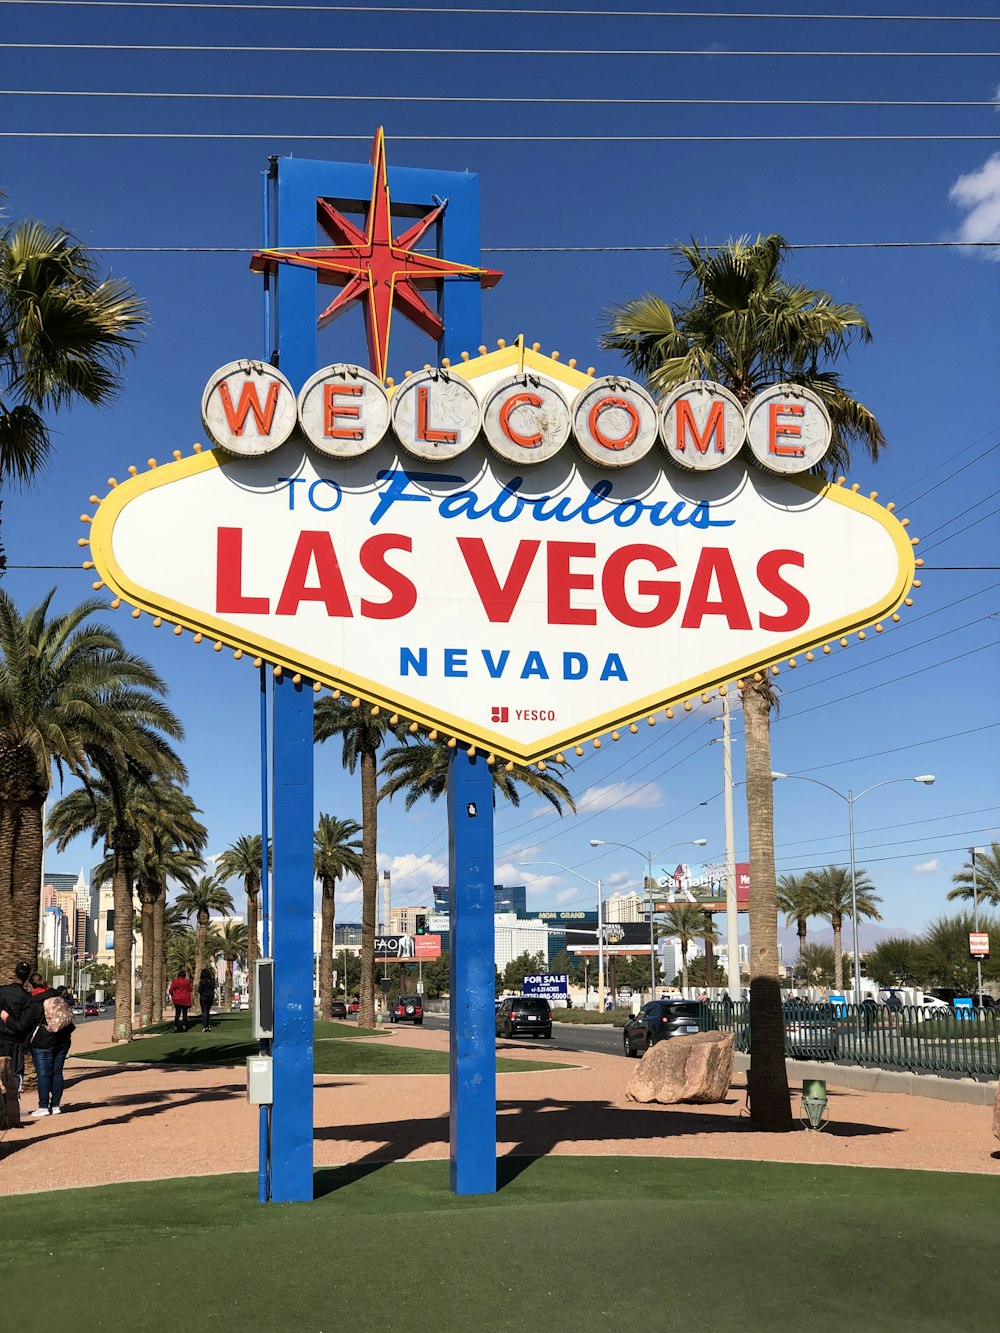 Welcome to Fabulous Las Vegas Nevada signboard during daytime